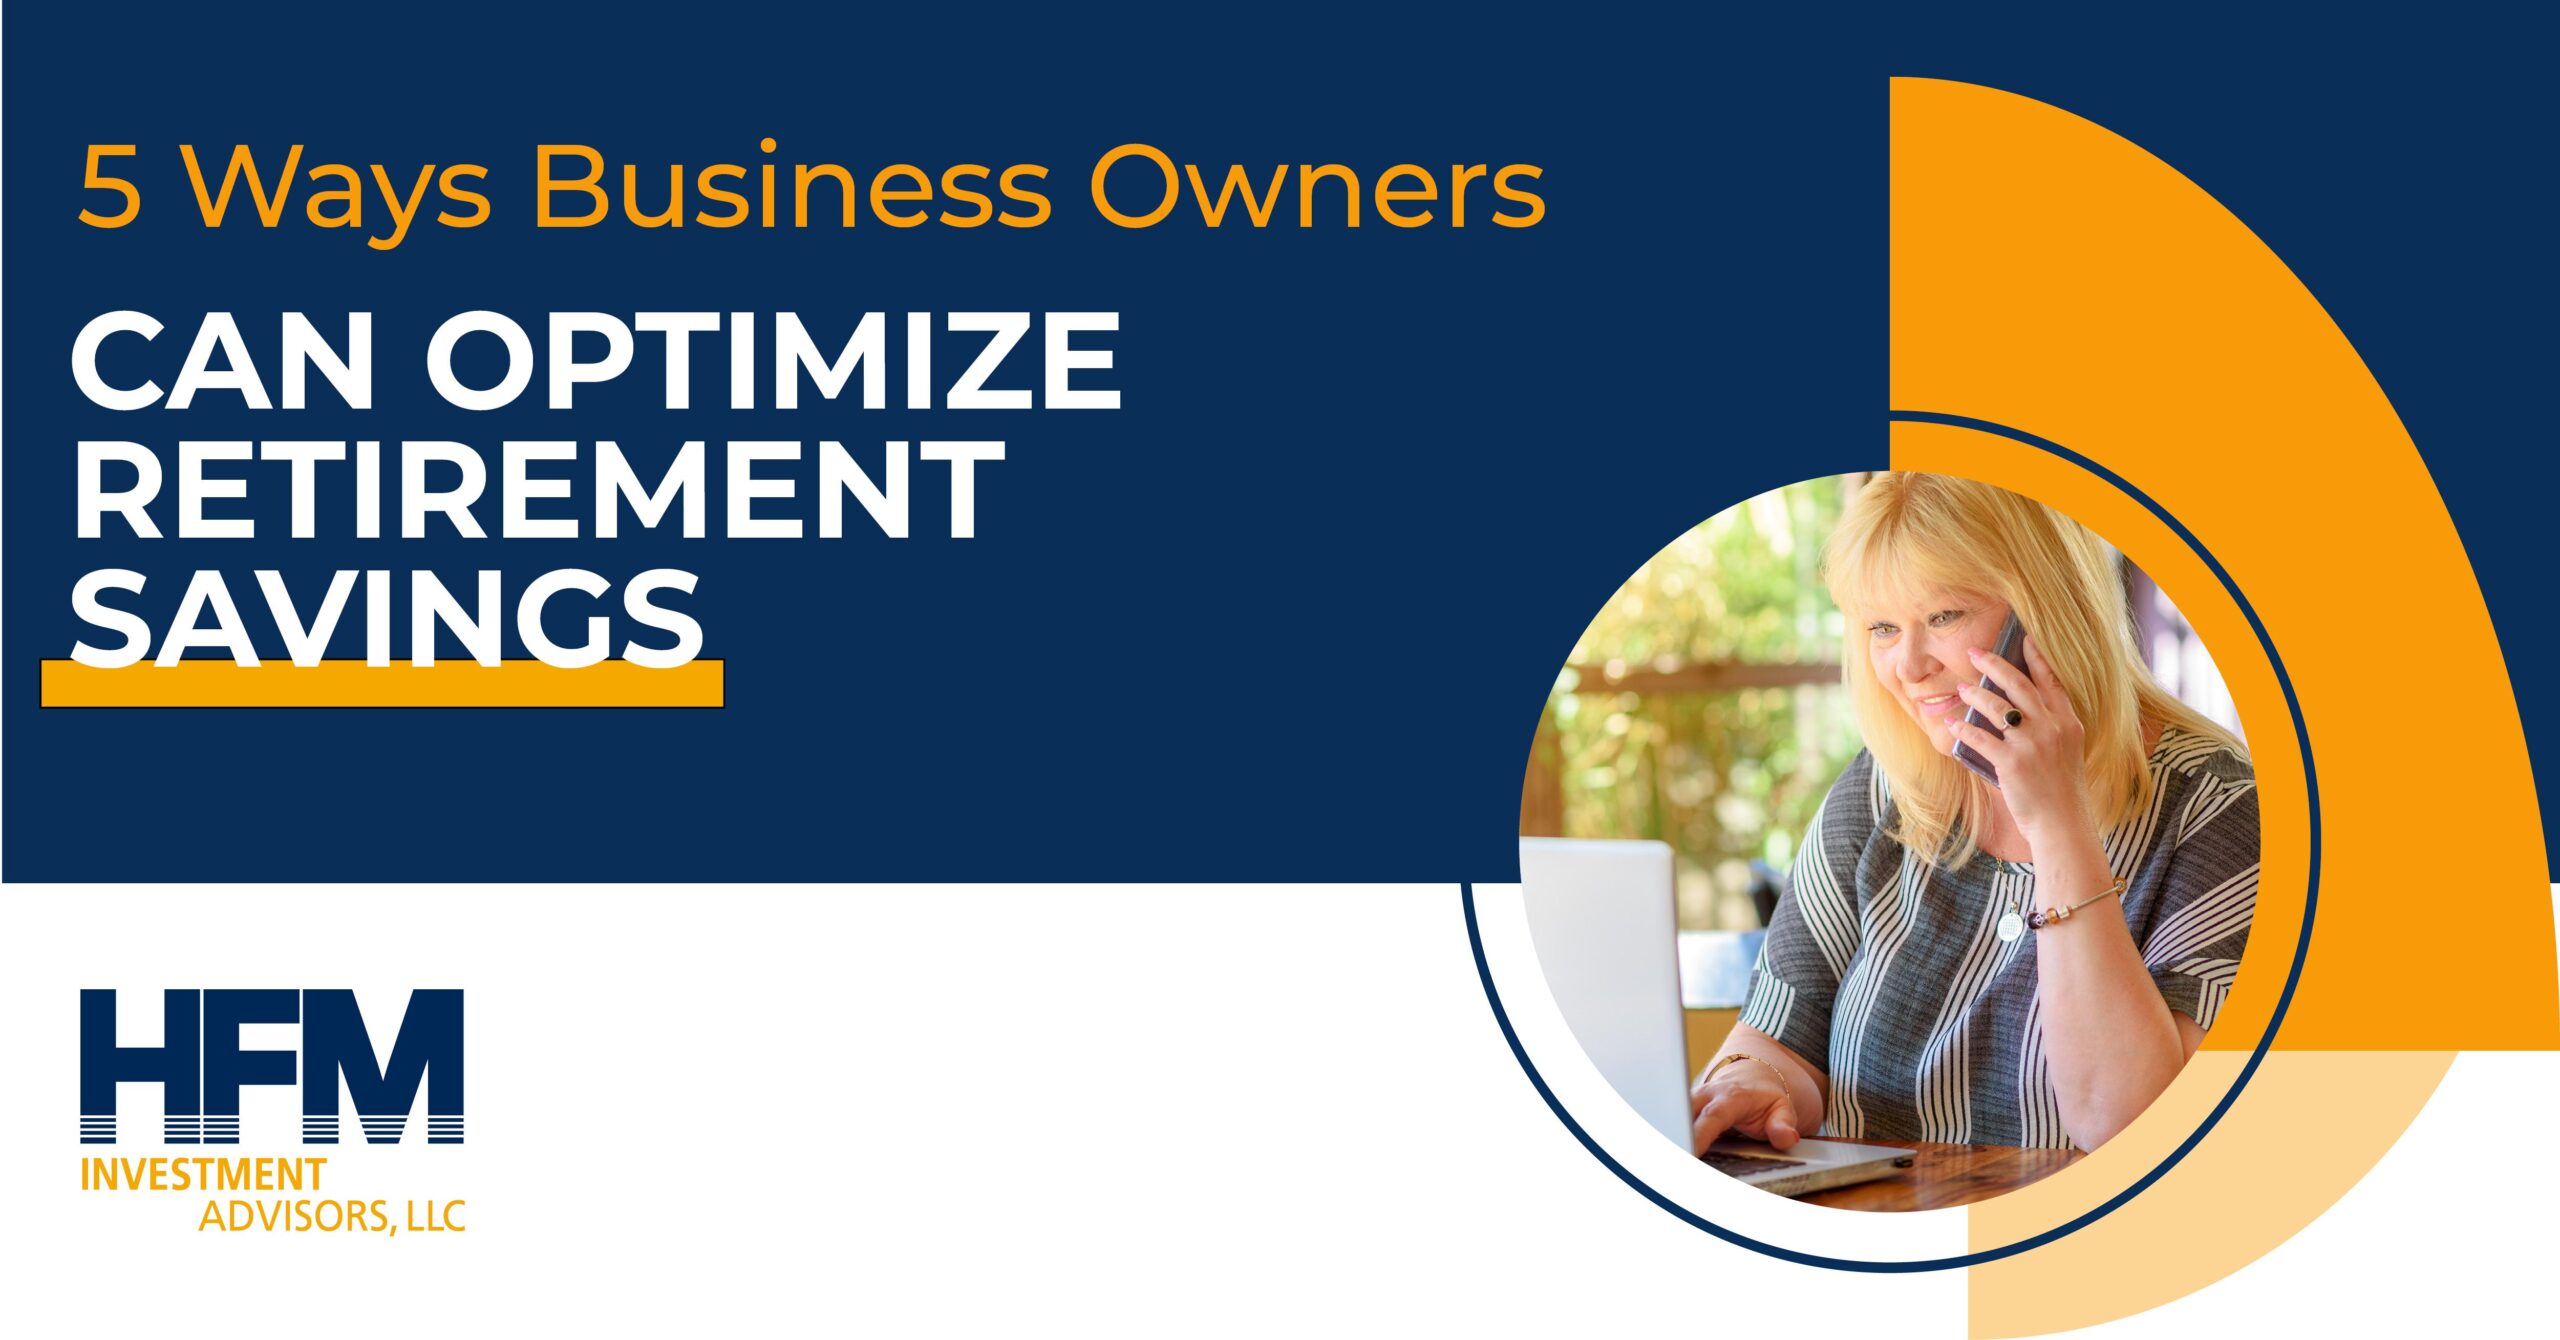 5 Ways Business Owners Can Optimize Retirement Savings